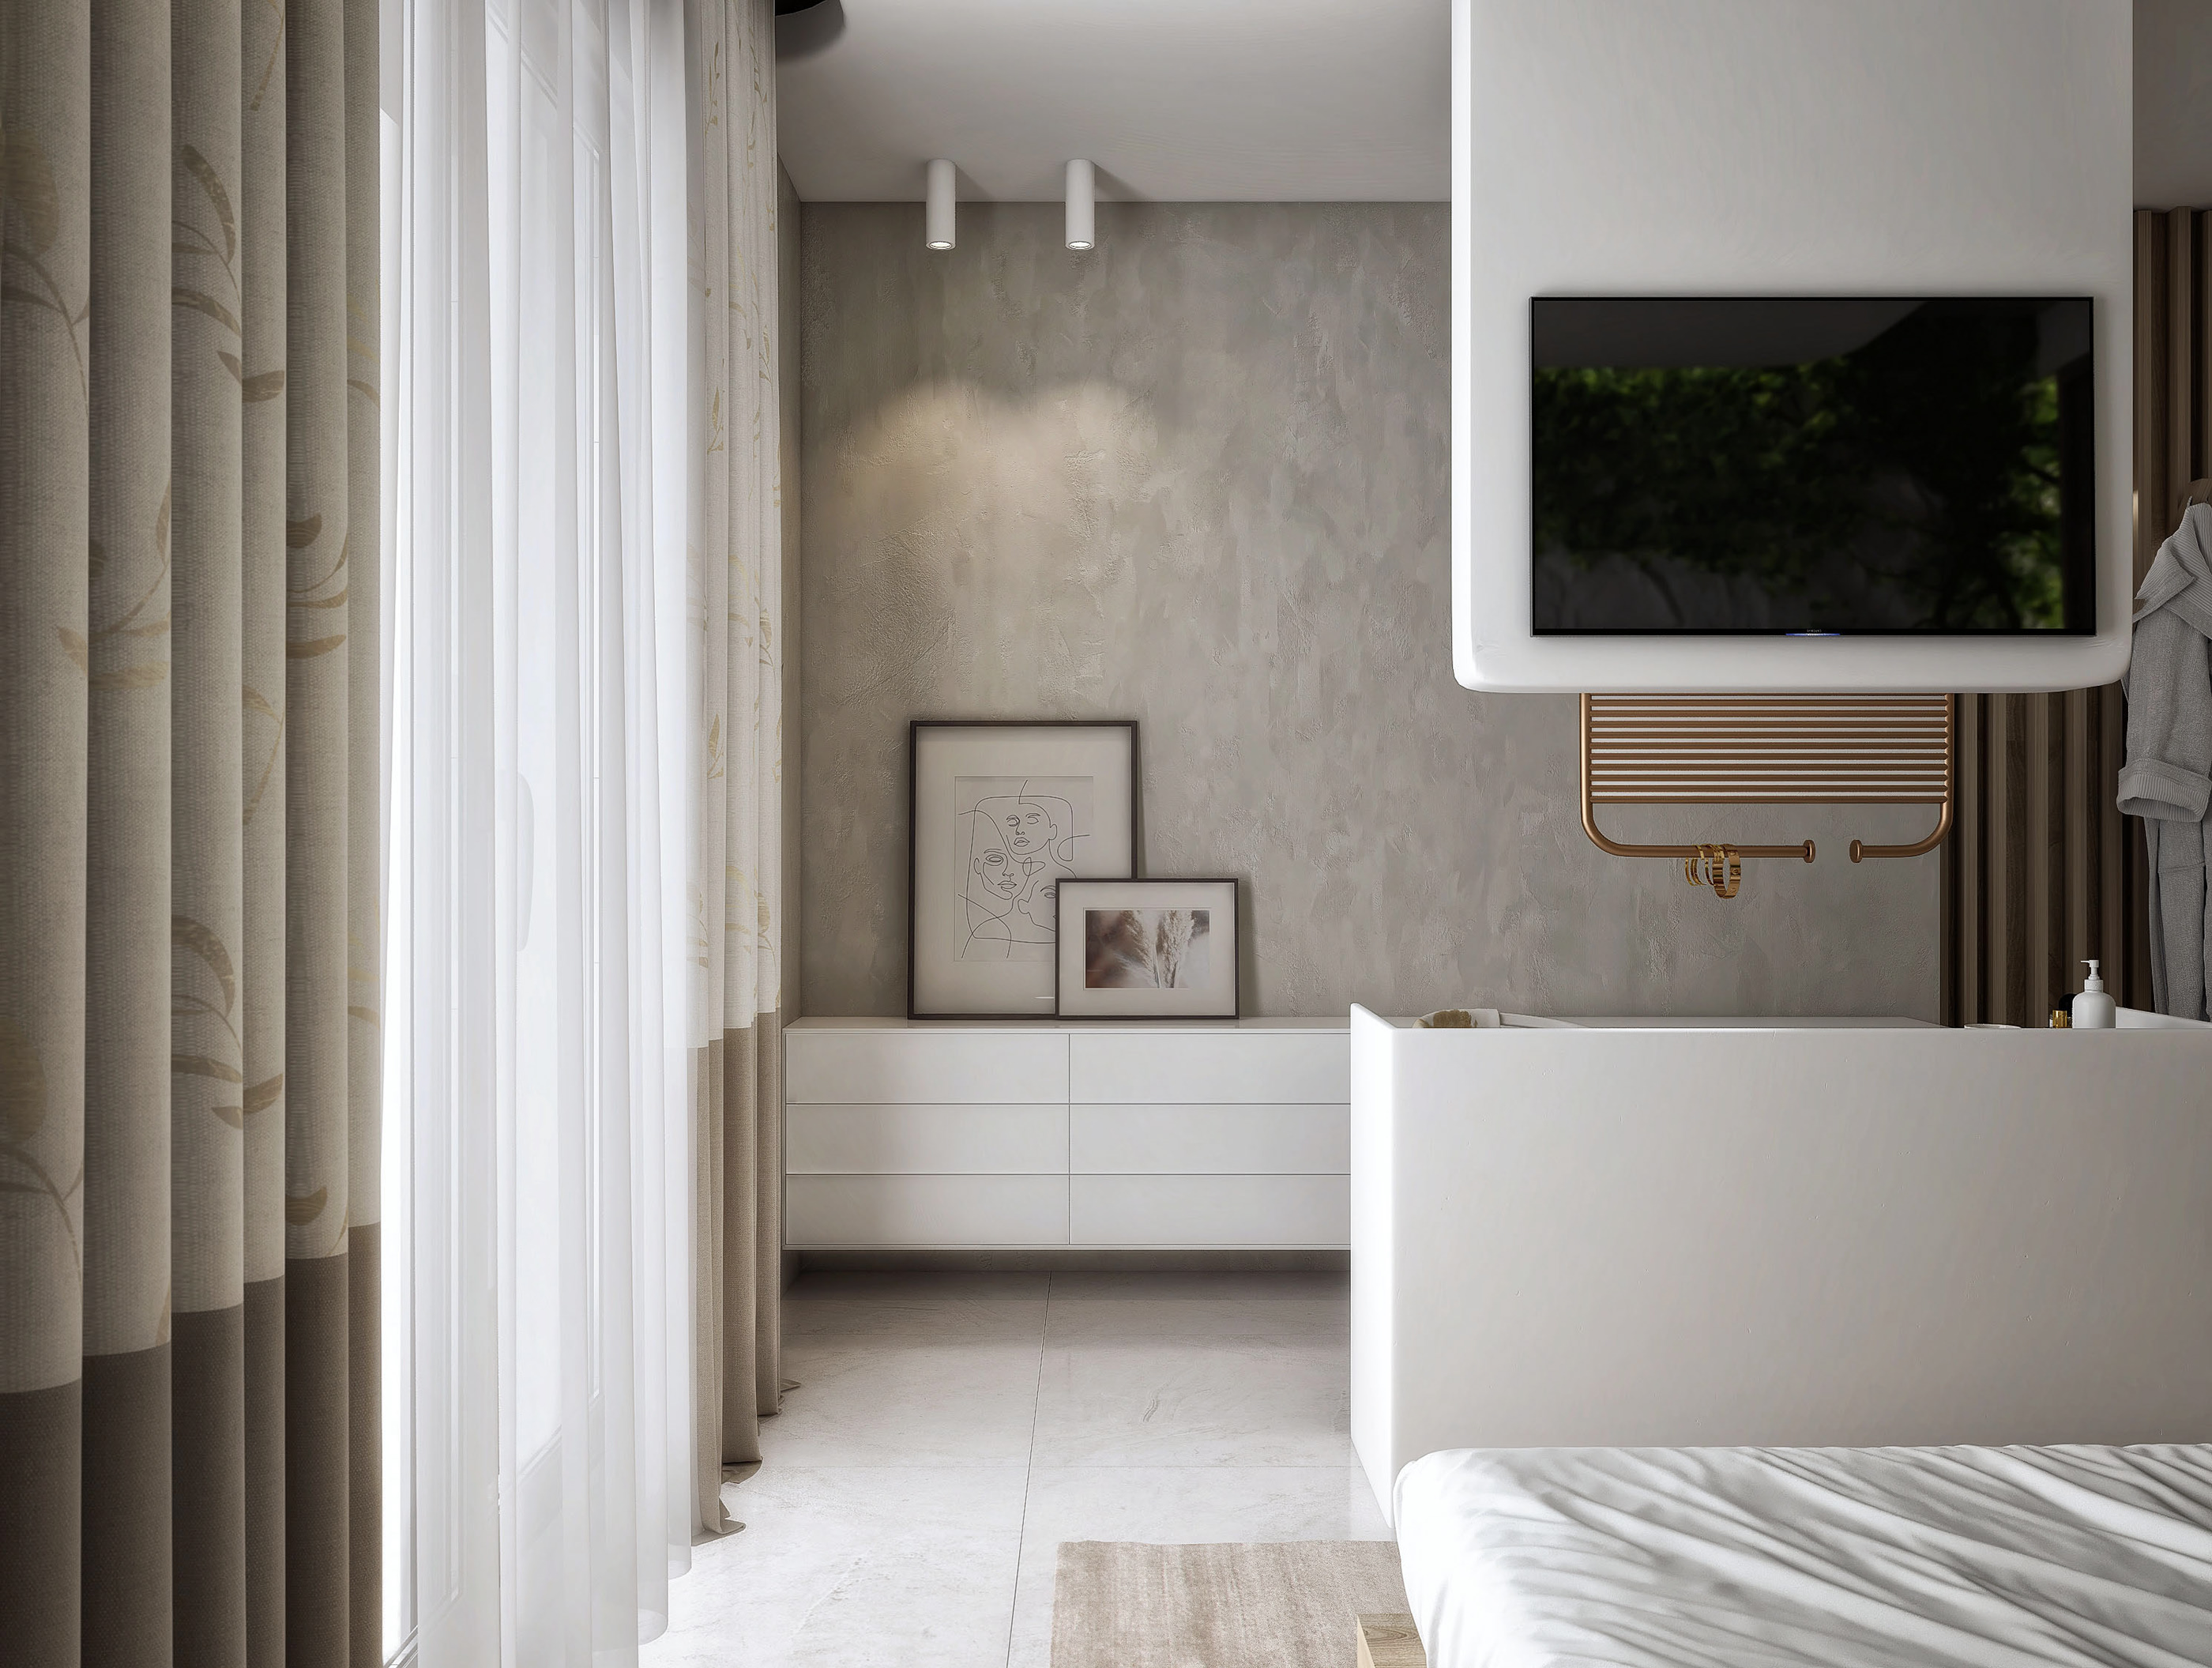 Apartment in Rhodes, Greece in 3d max vray 3.0 image